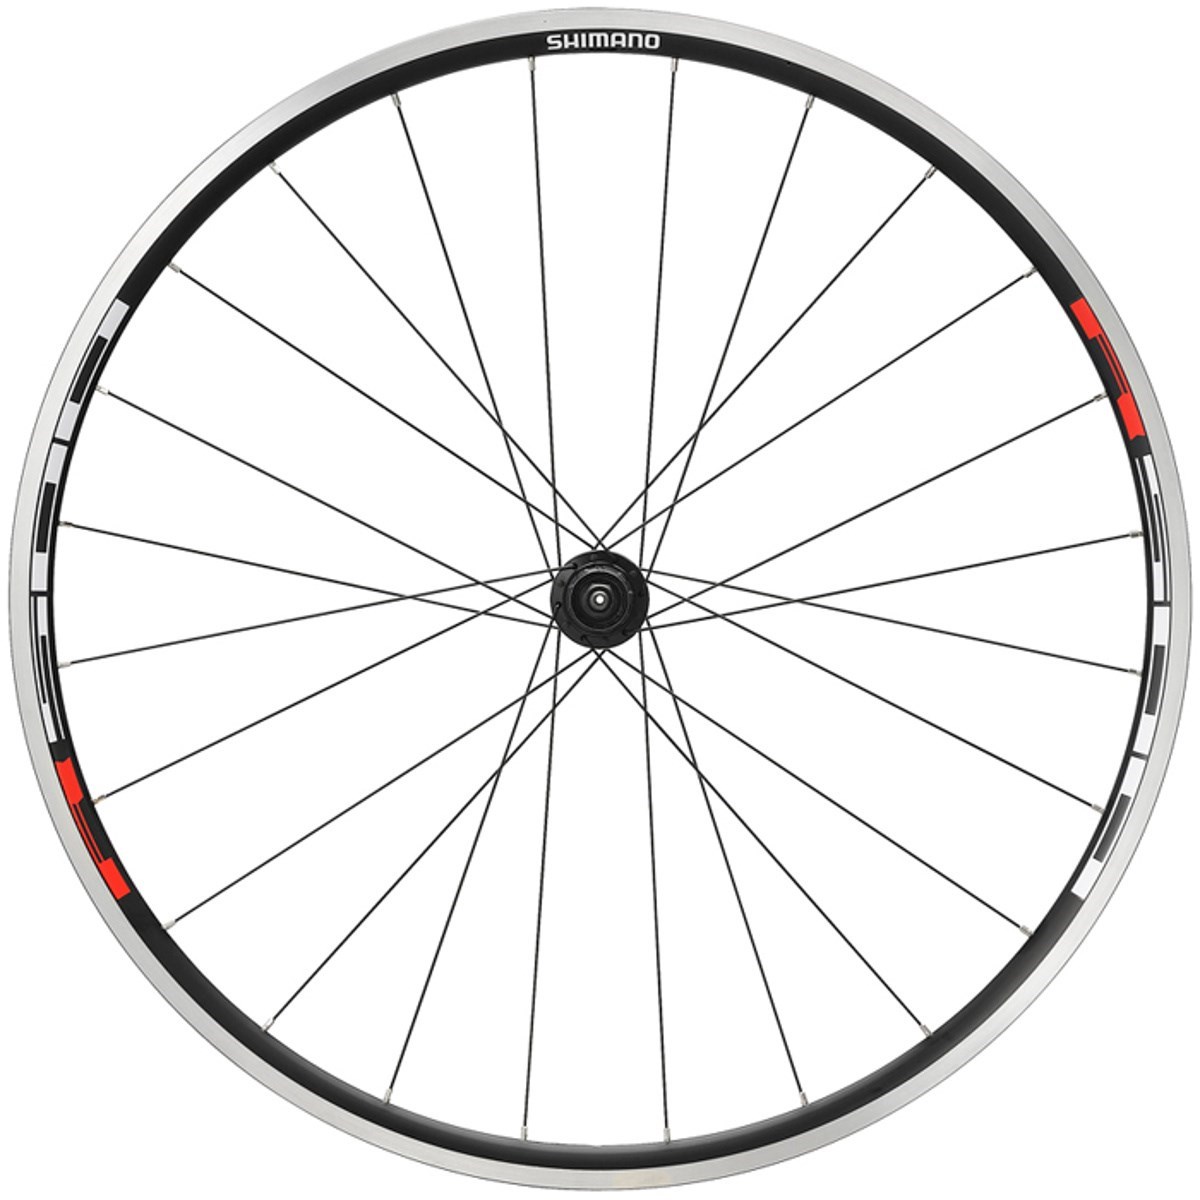 Shimano WHR500 Clincher Rear Road Wheel product image